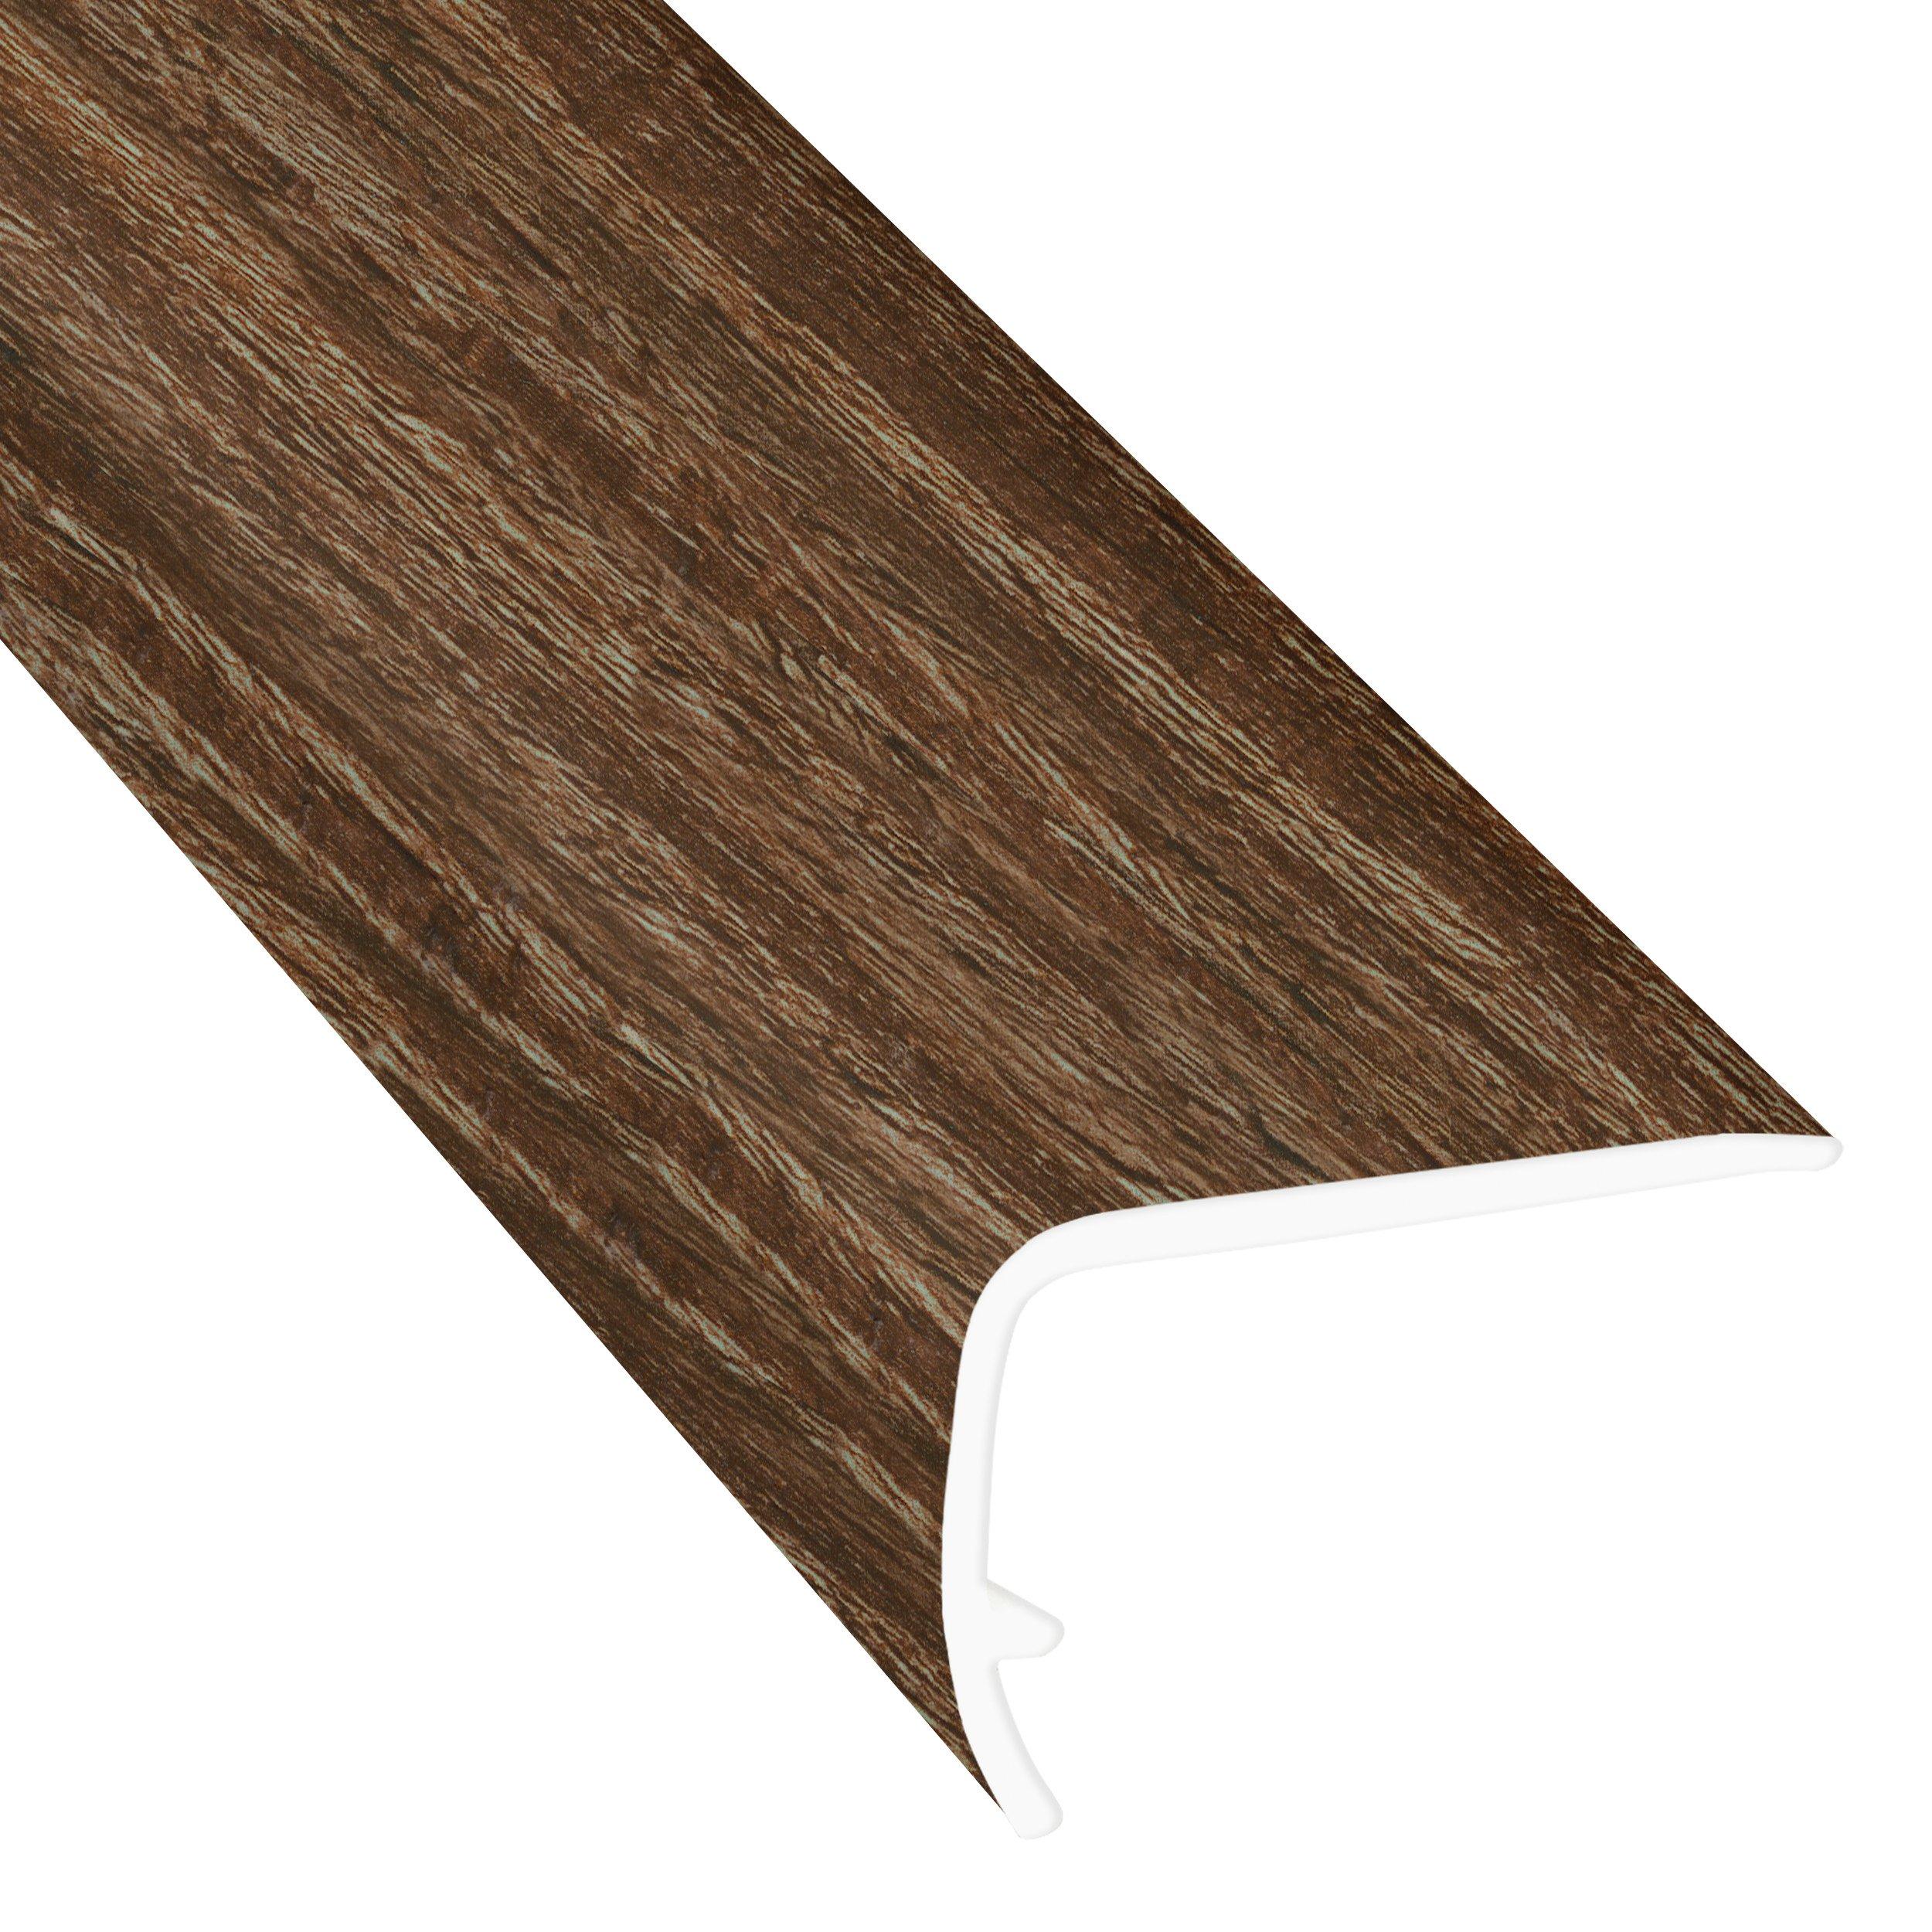 Salazar Isle 94in. Vinyl Overlapping Stair Nose